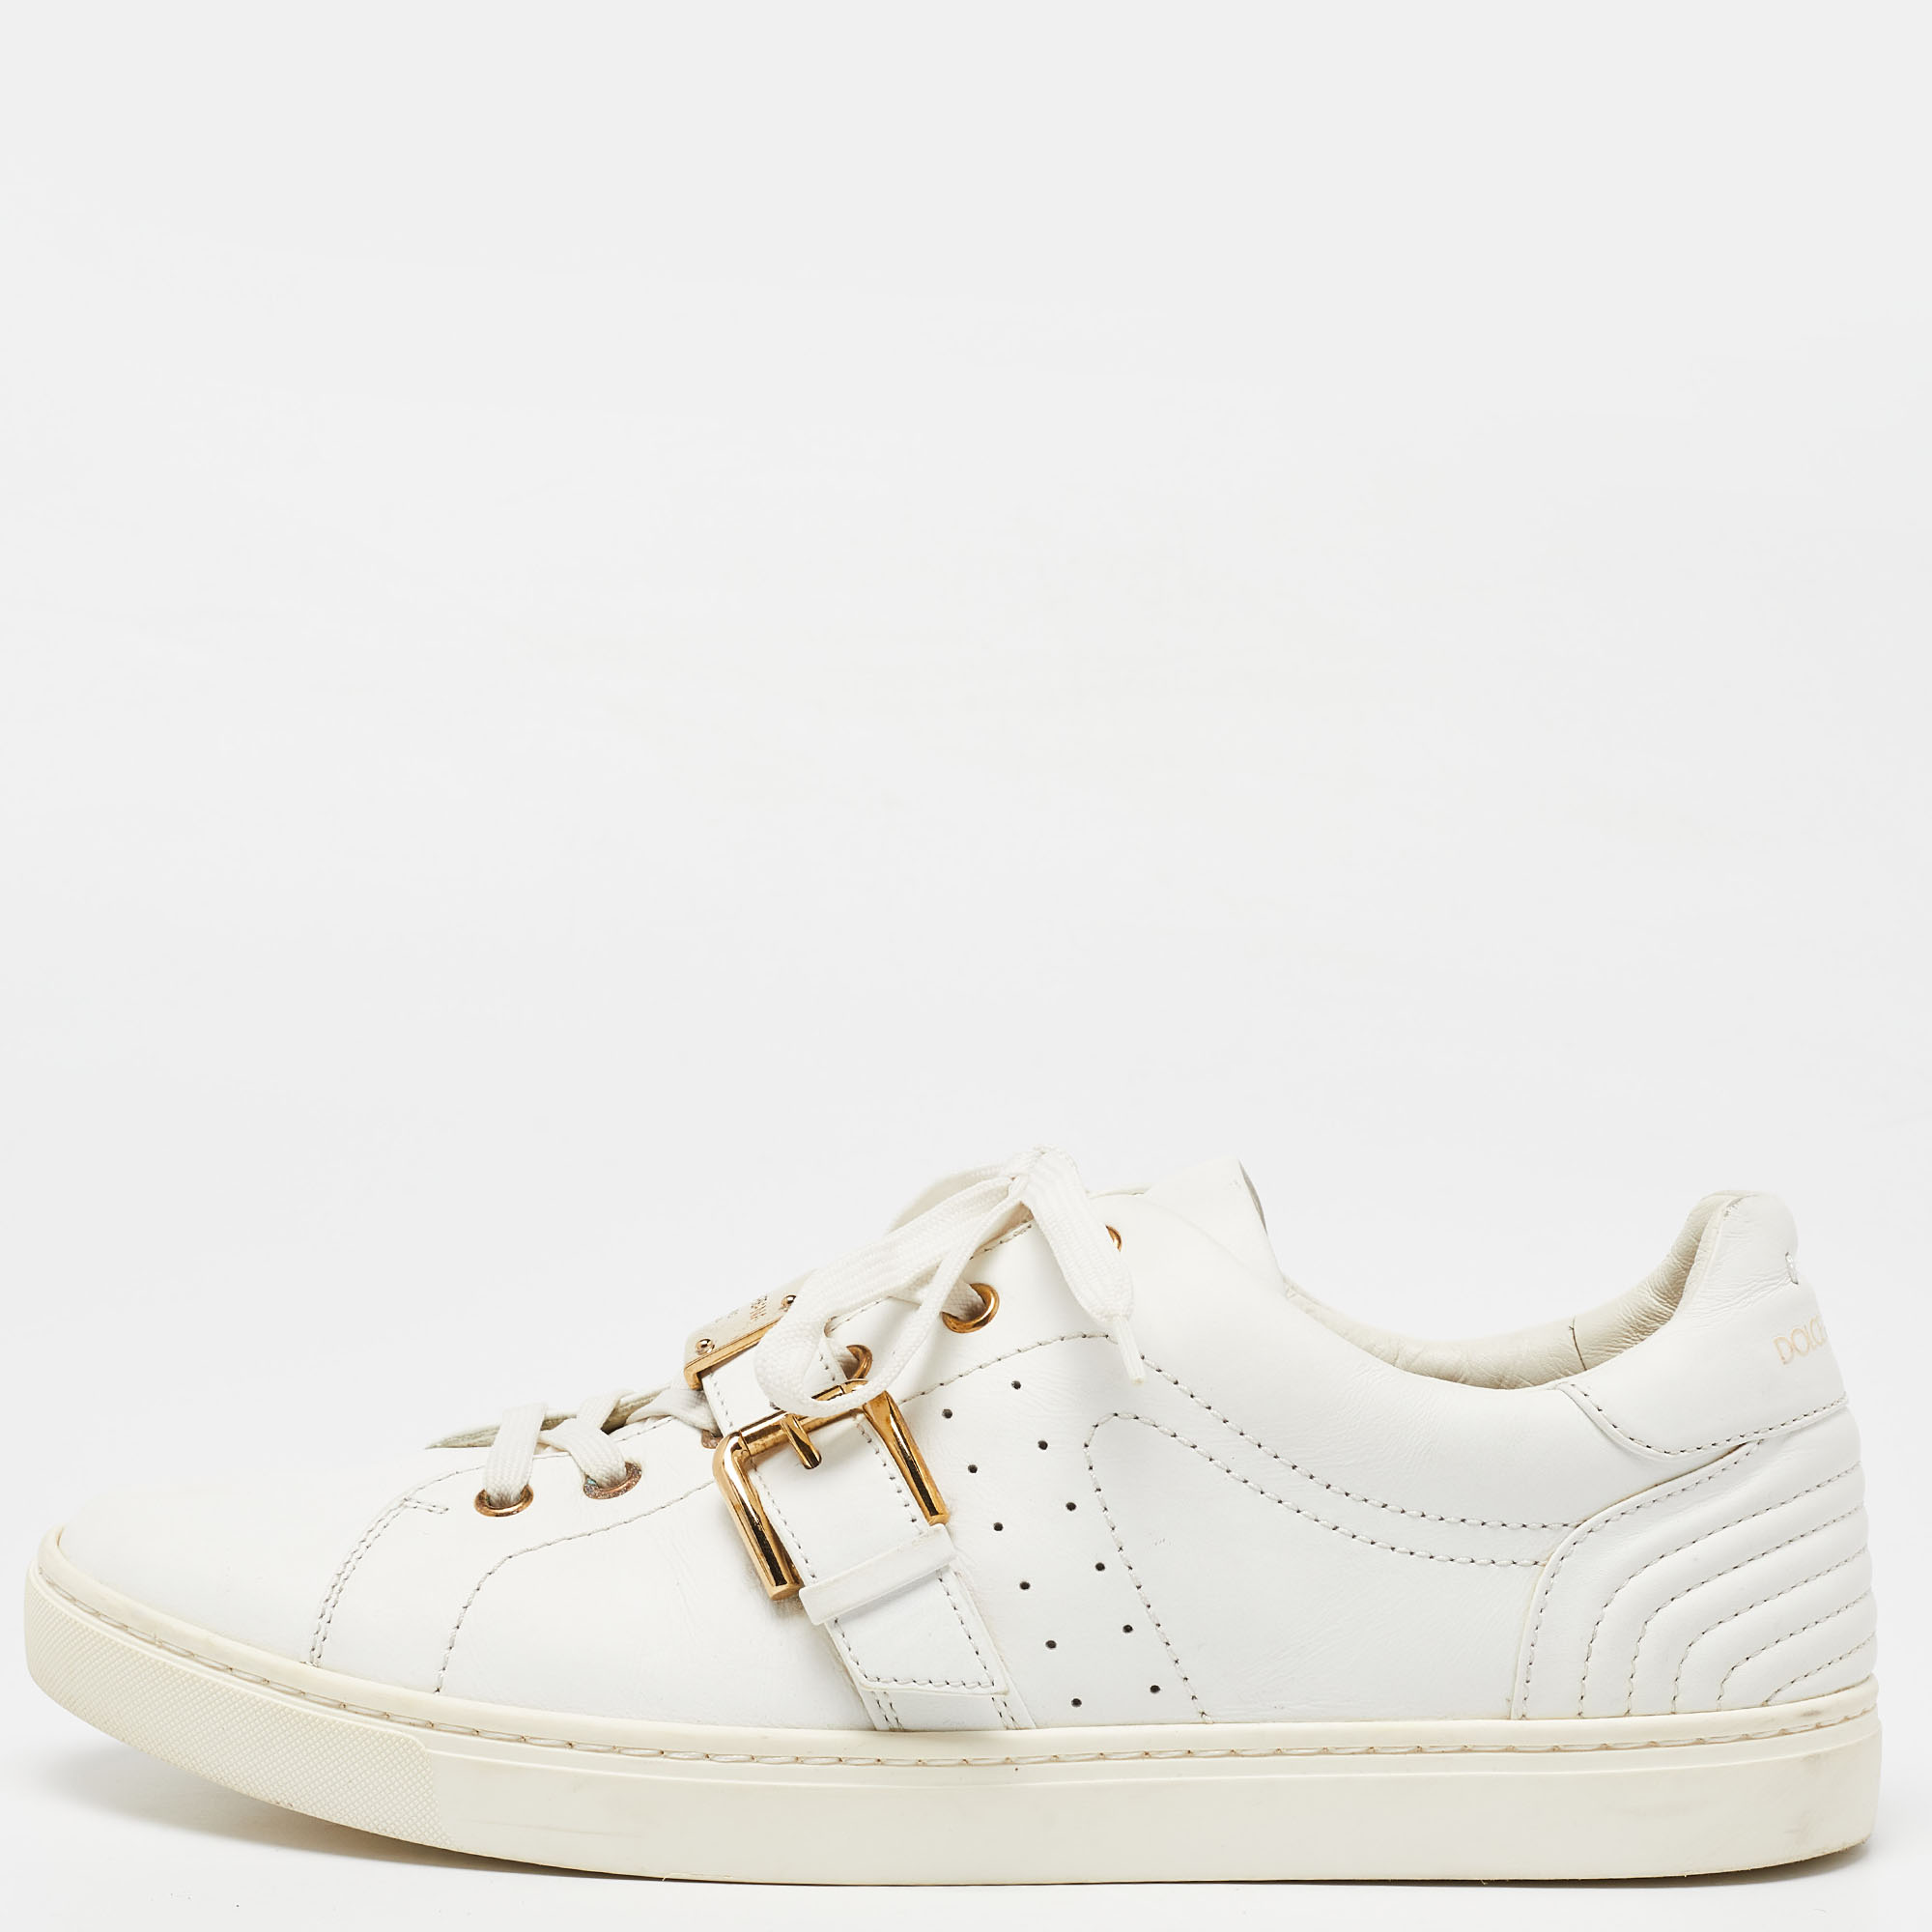 Dolce & gabbana dolce and gabbana white leather buckle detail low top sneakers size 43